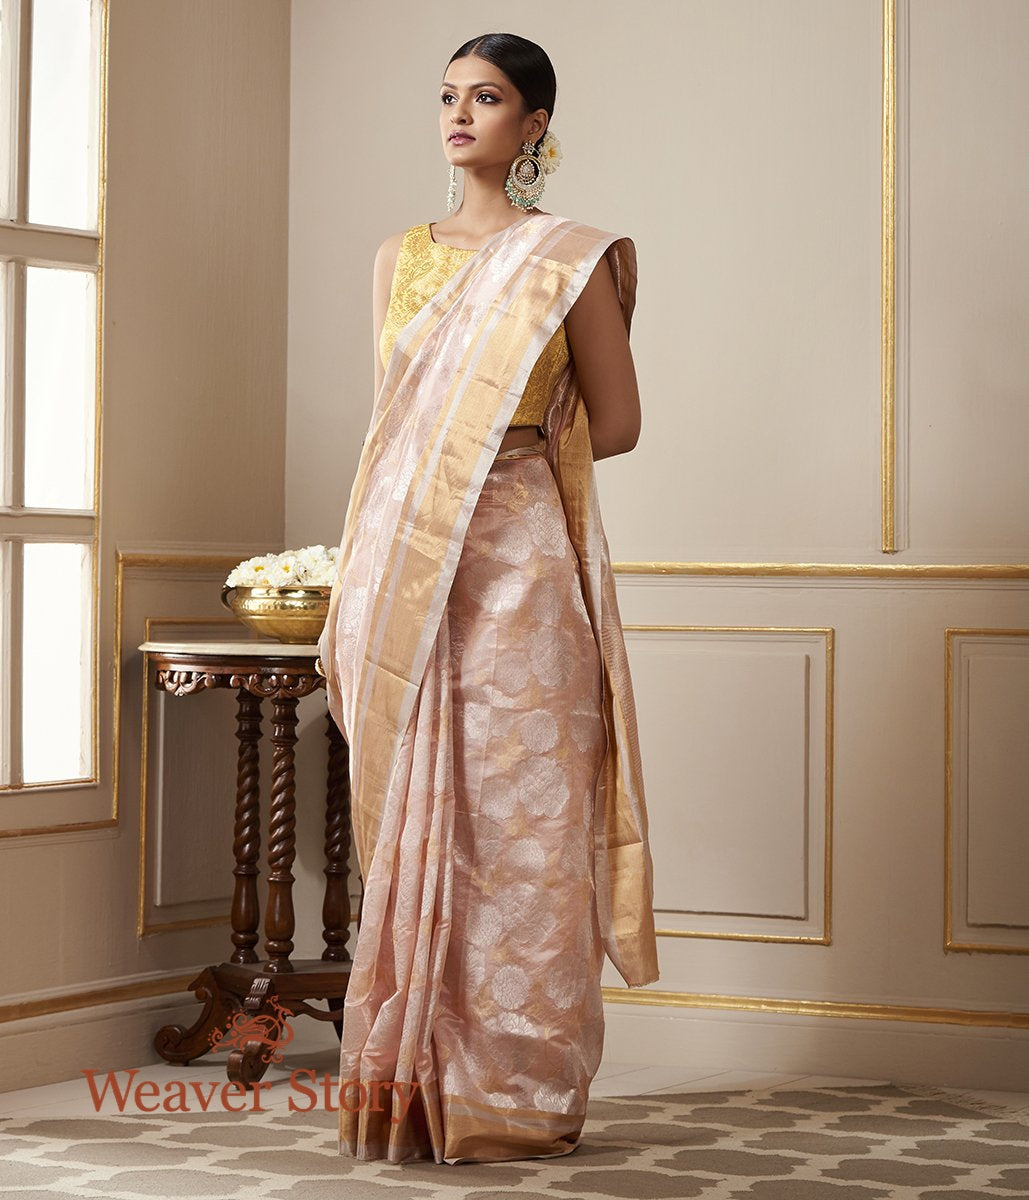 Handwoven_Soft_Pink_Chanderi_Silk_Saree_with_Gold_and_Silver_Zari_Floral_Jaal_WeaverStory_02